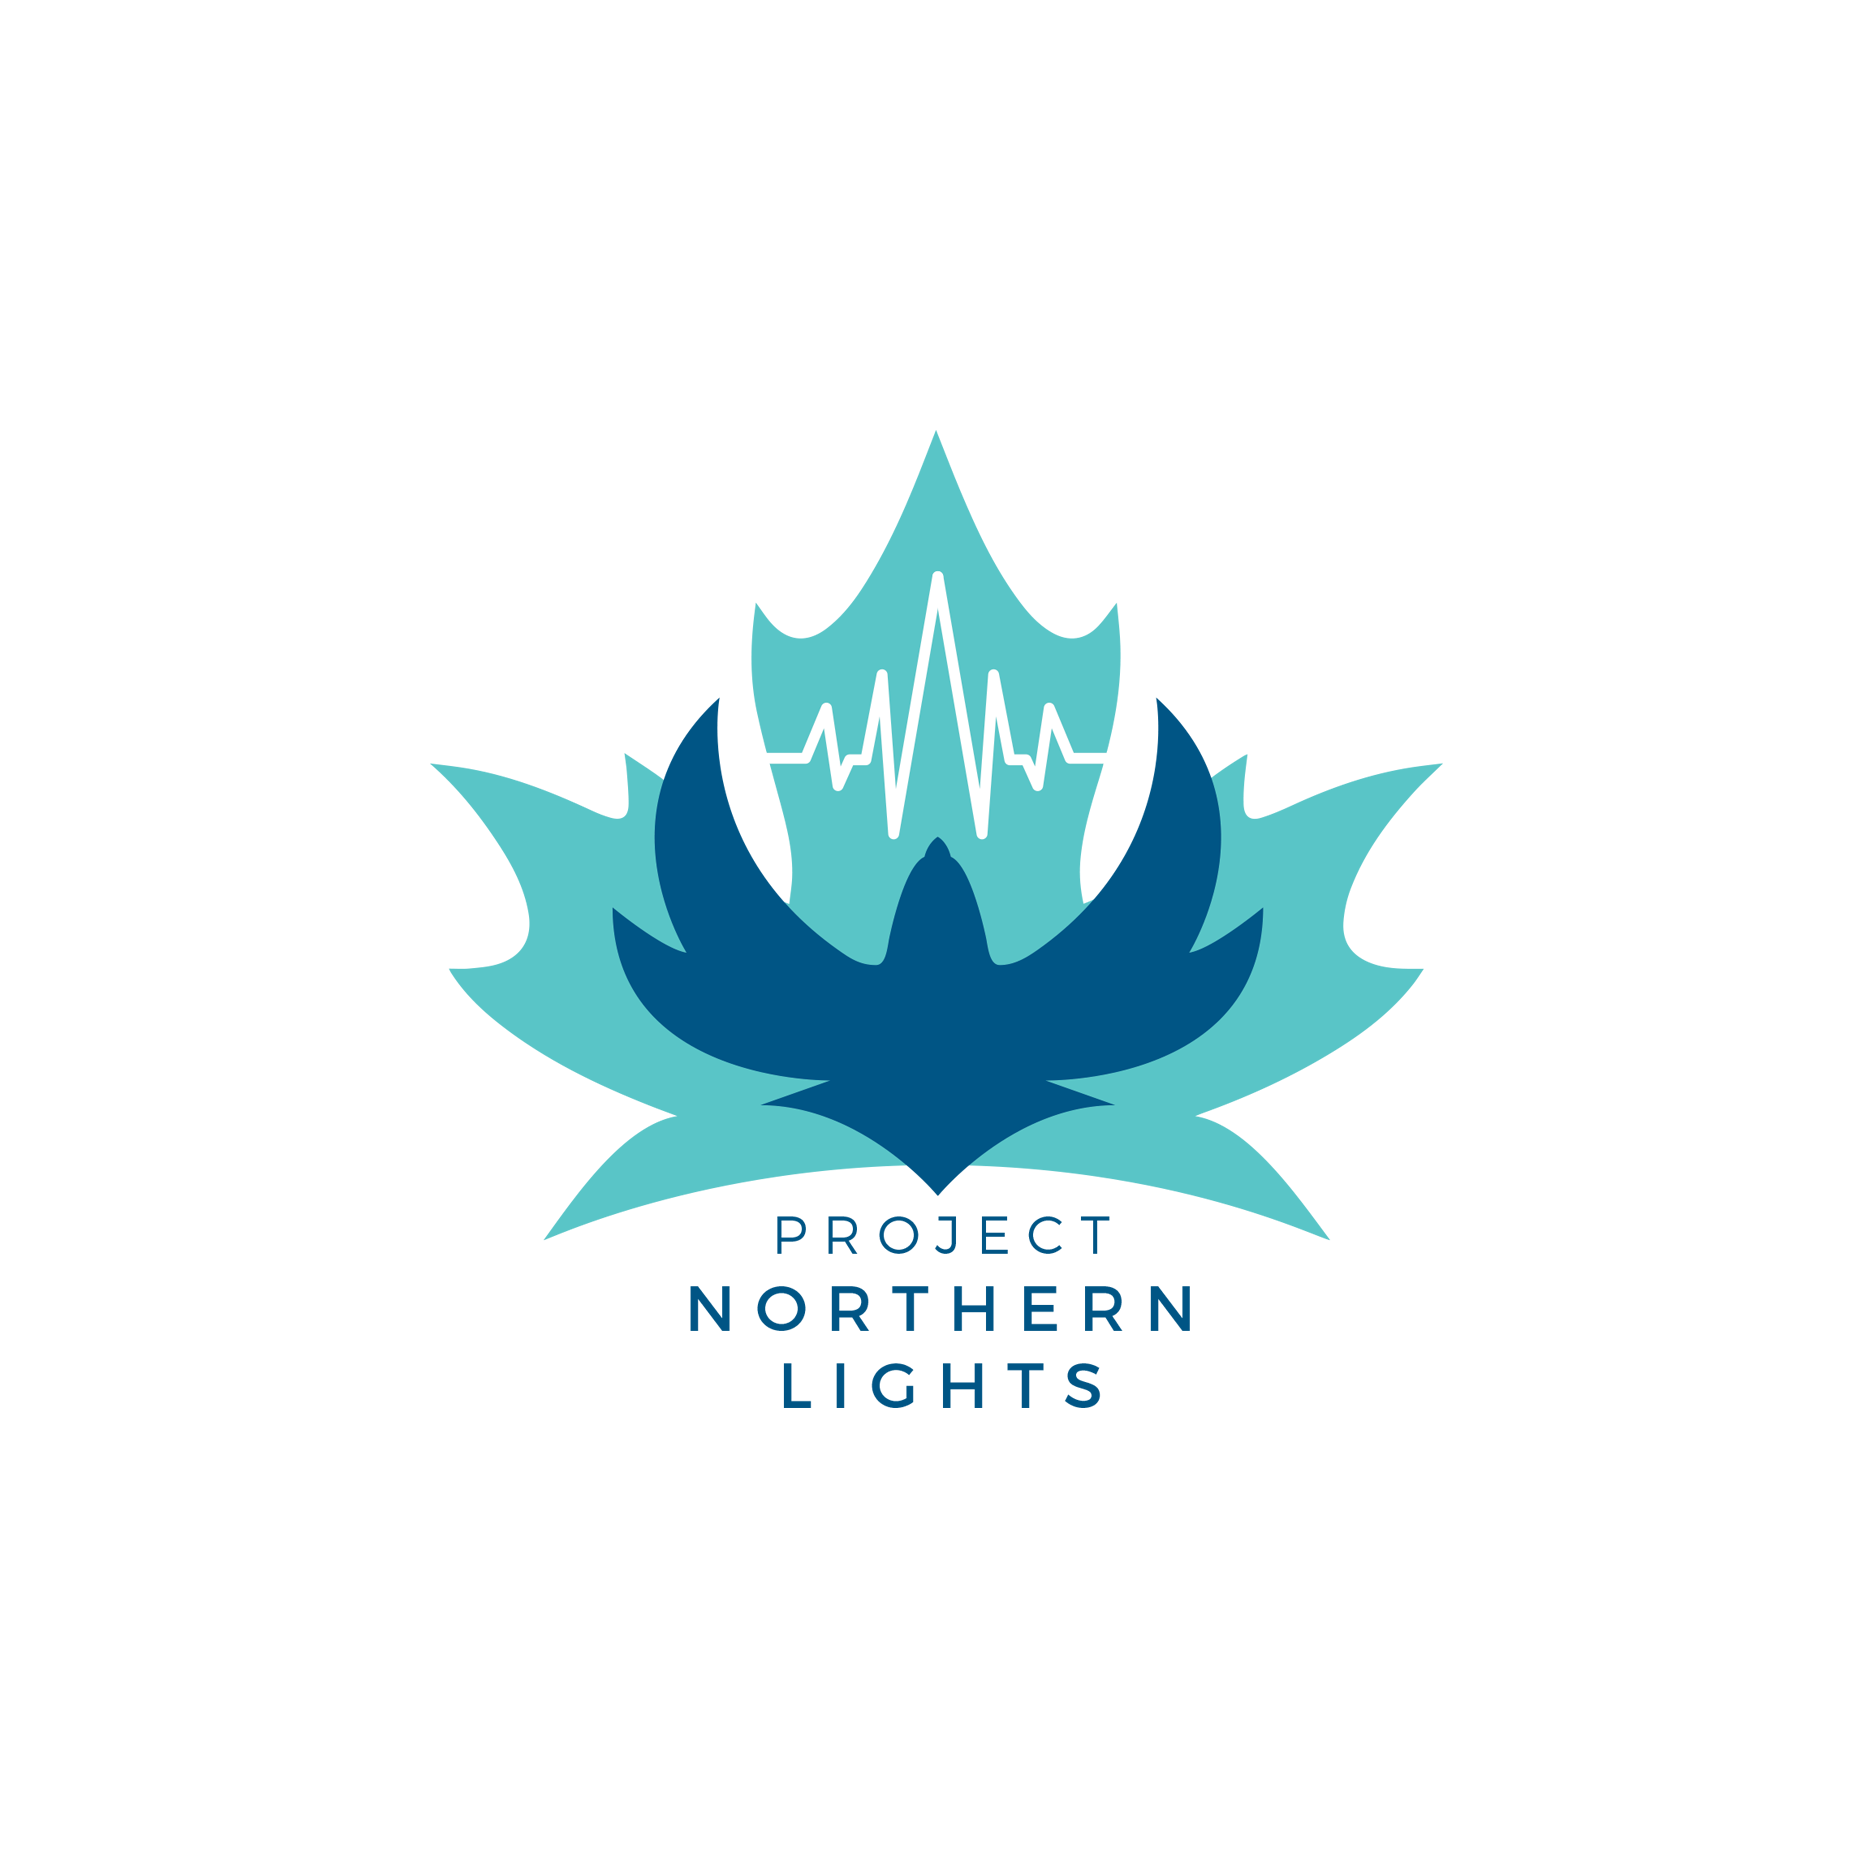 About — Project Northern Lights